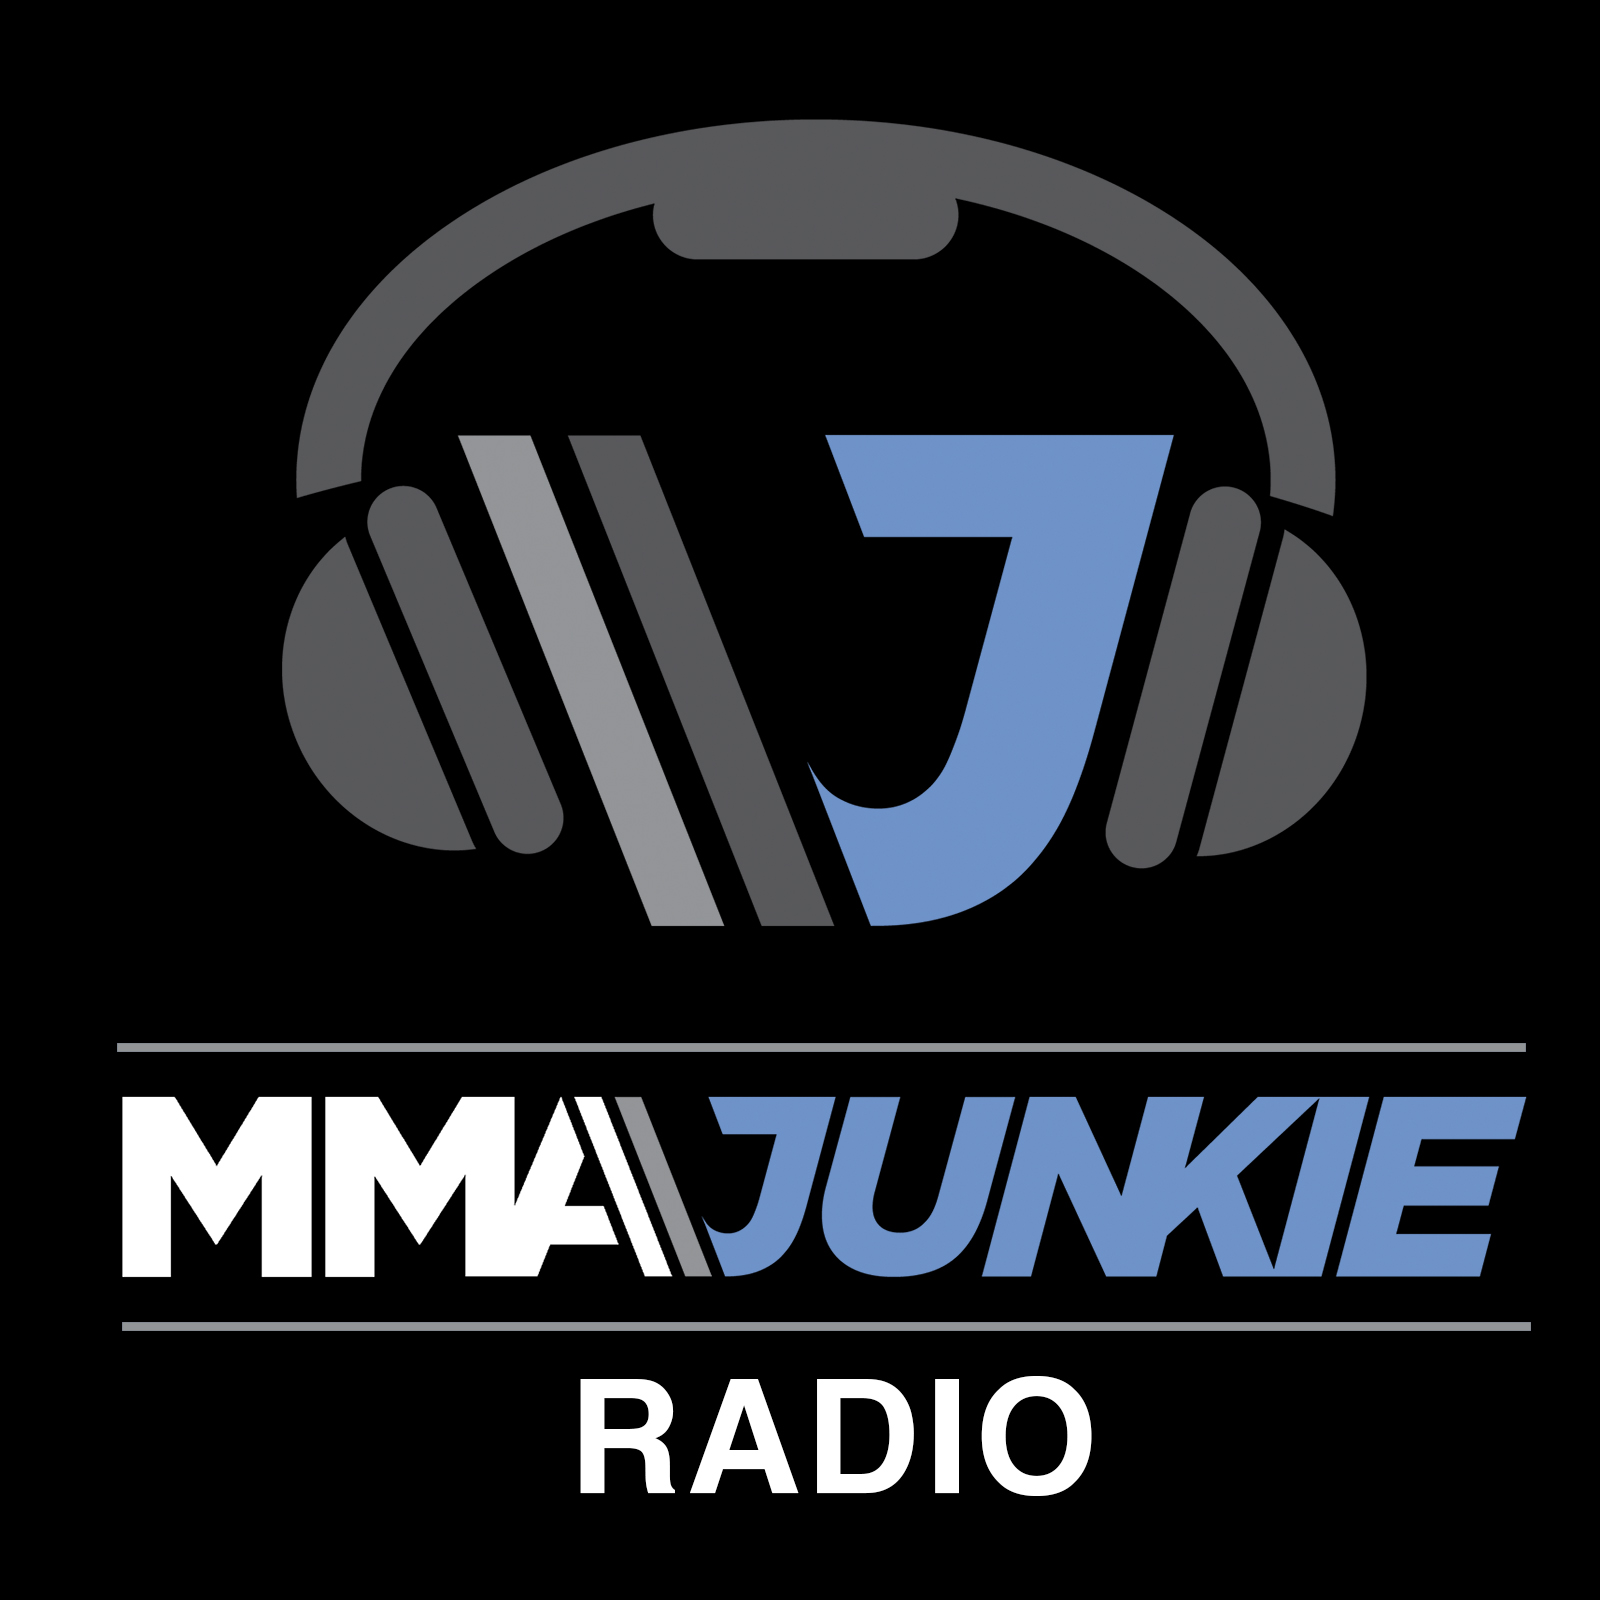 Ep. #3239: Cain Velasquez is formally charged, UFC preview, more